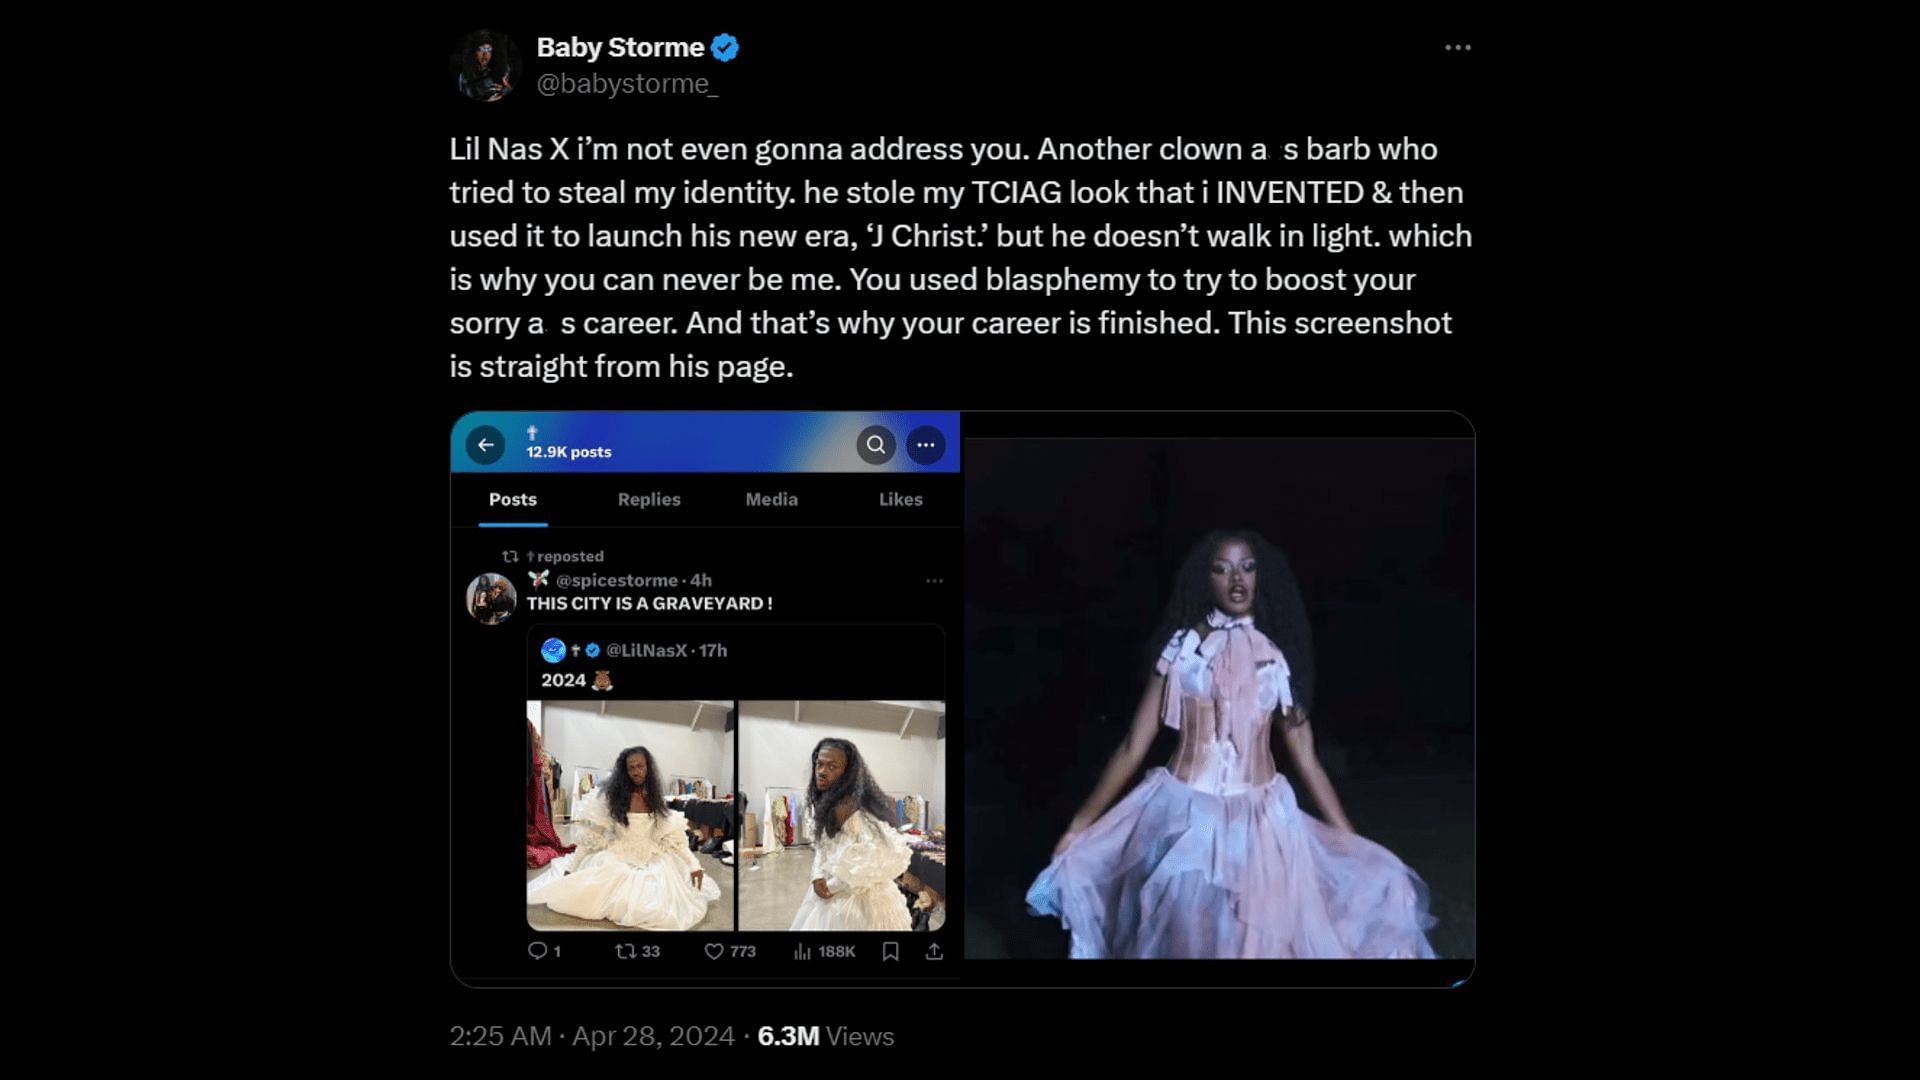 Baby Storme accuses Lil Nas of stealing her identity. (Image via X/@babystorme_)